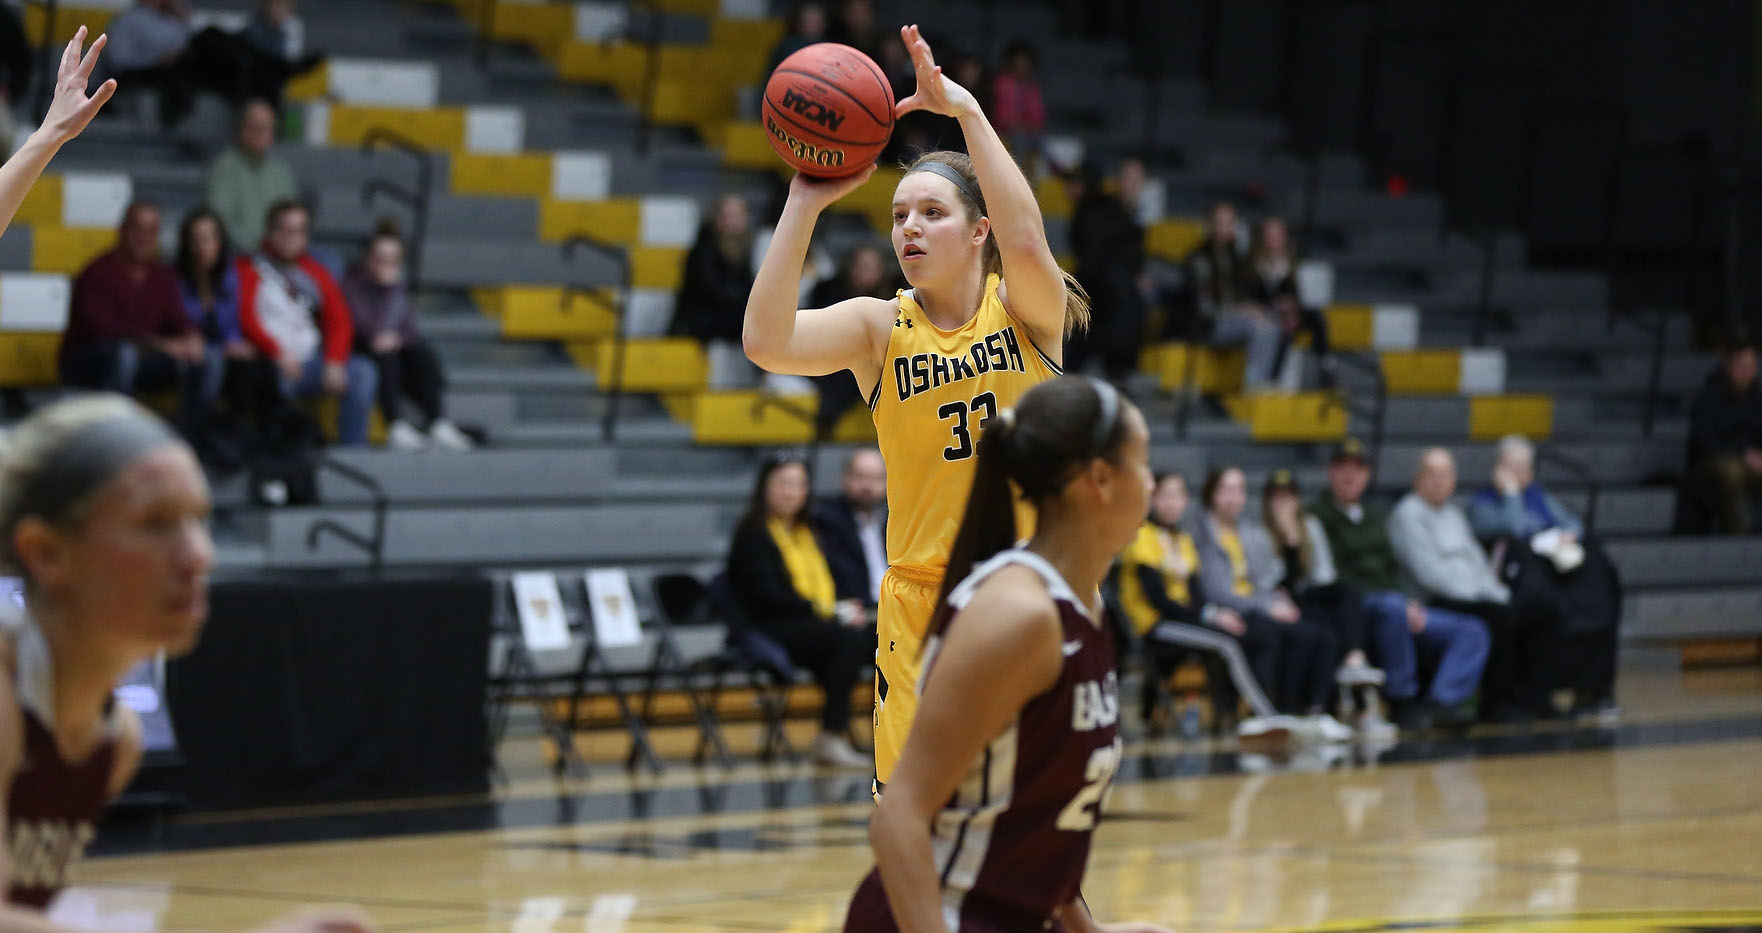 Nikki Arneson scored 24 of her career-high 33 points against the Eagles in the first half.